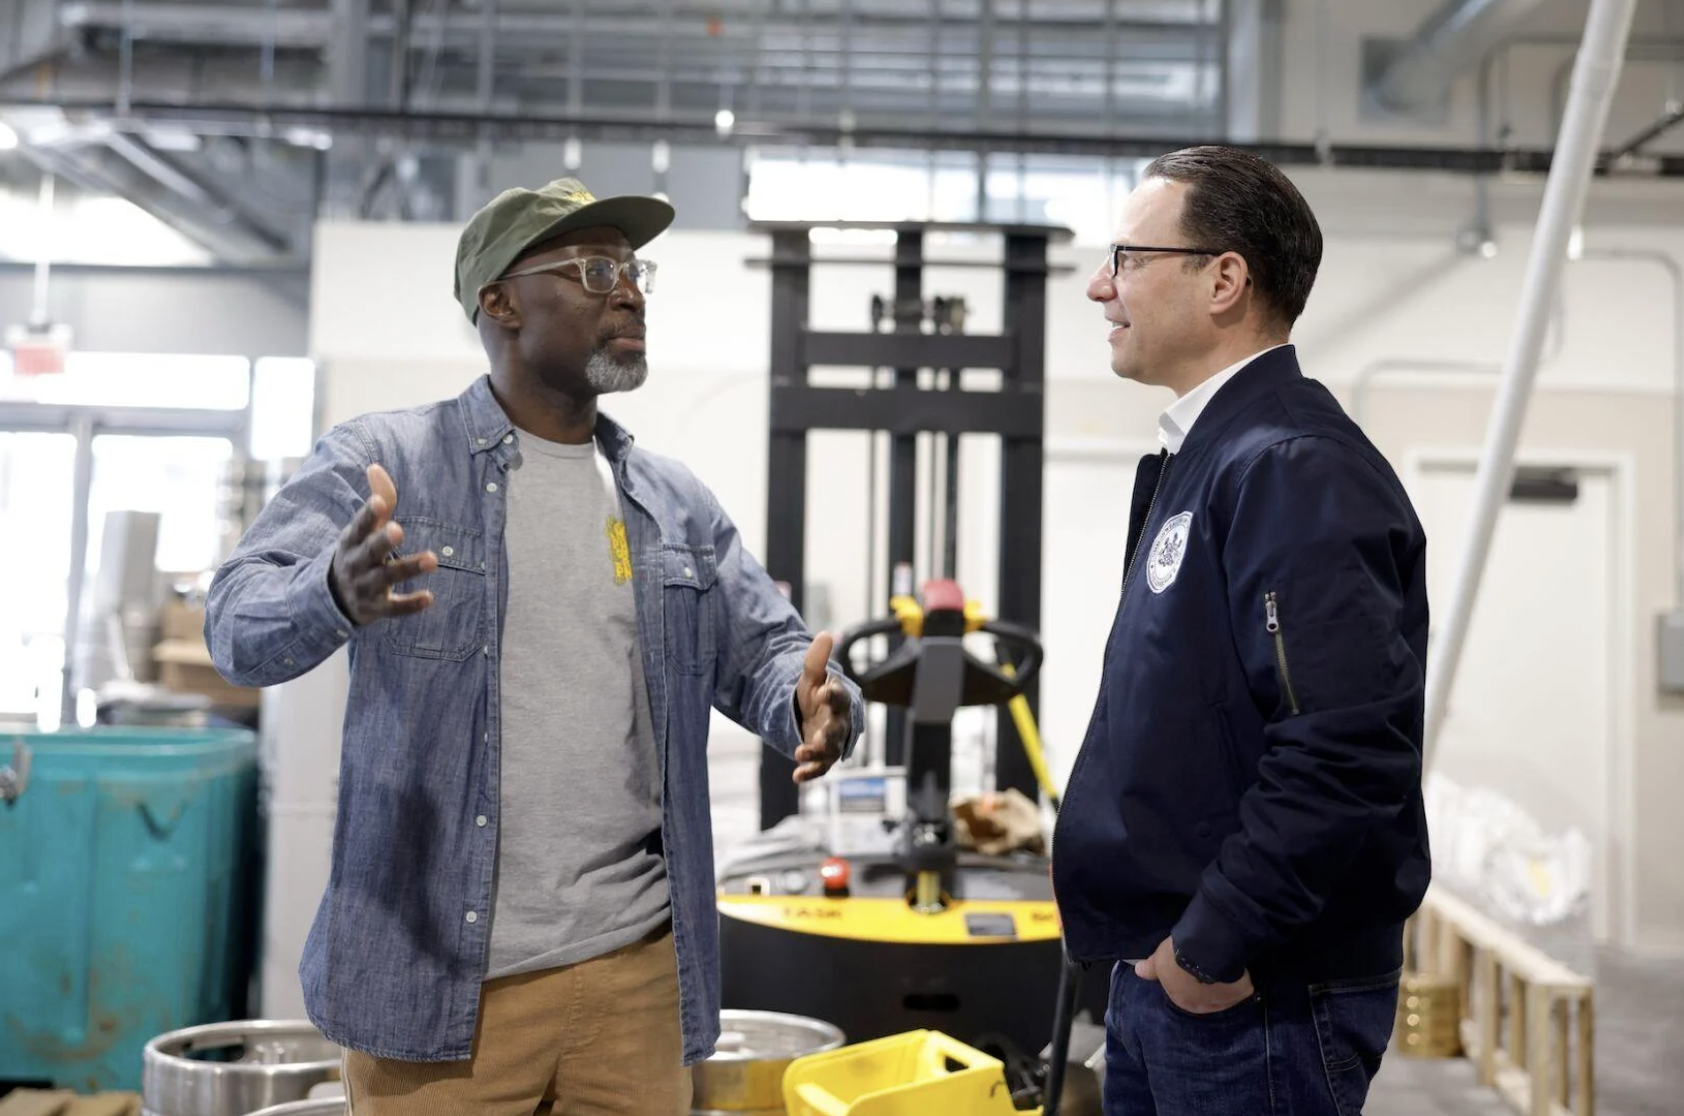 Mengistu Koilor, owner of Two Locals Brewing Co., speaks with Gov. Josh Shapiro during a Thursday, Feb. 15, visit to the business.